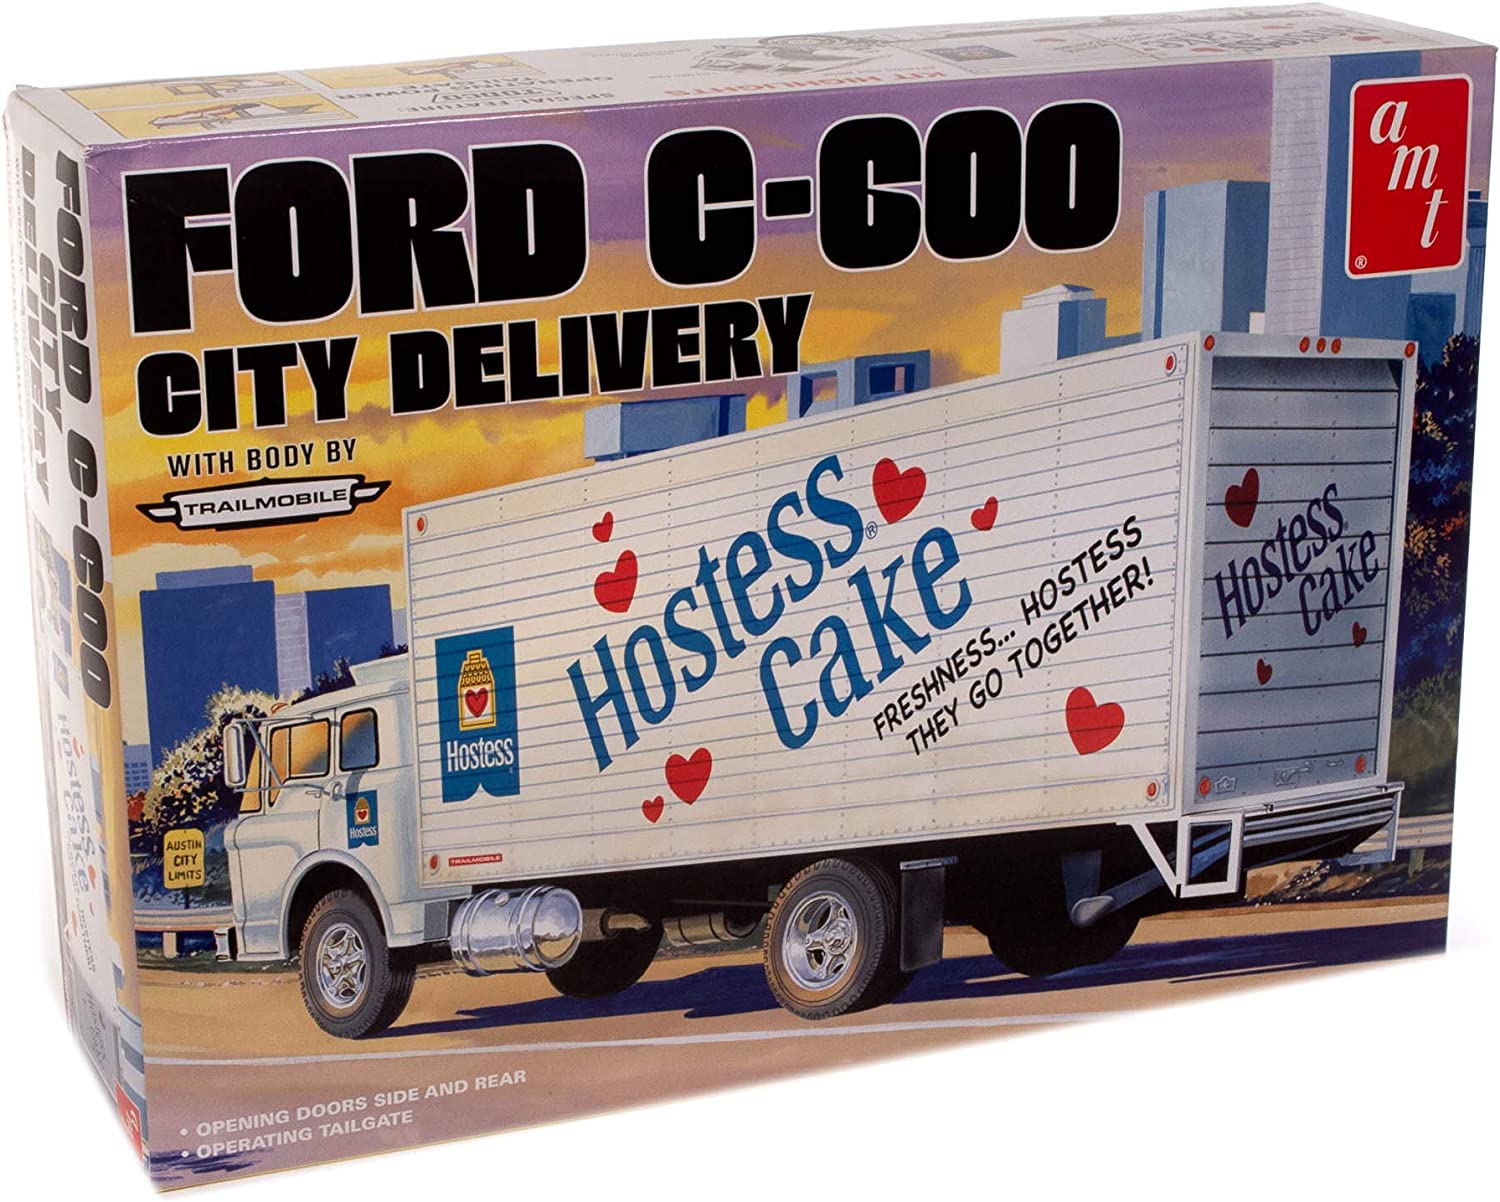 AMT 1139/12 1/25 Ford C-600 City Delivery, Hostess